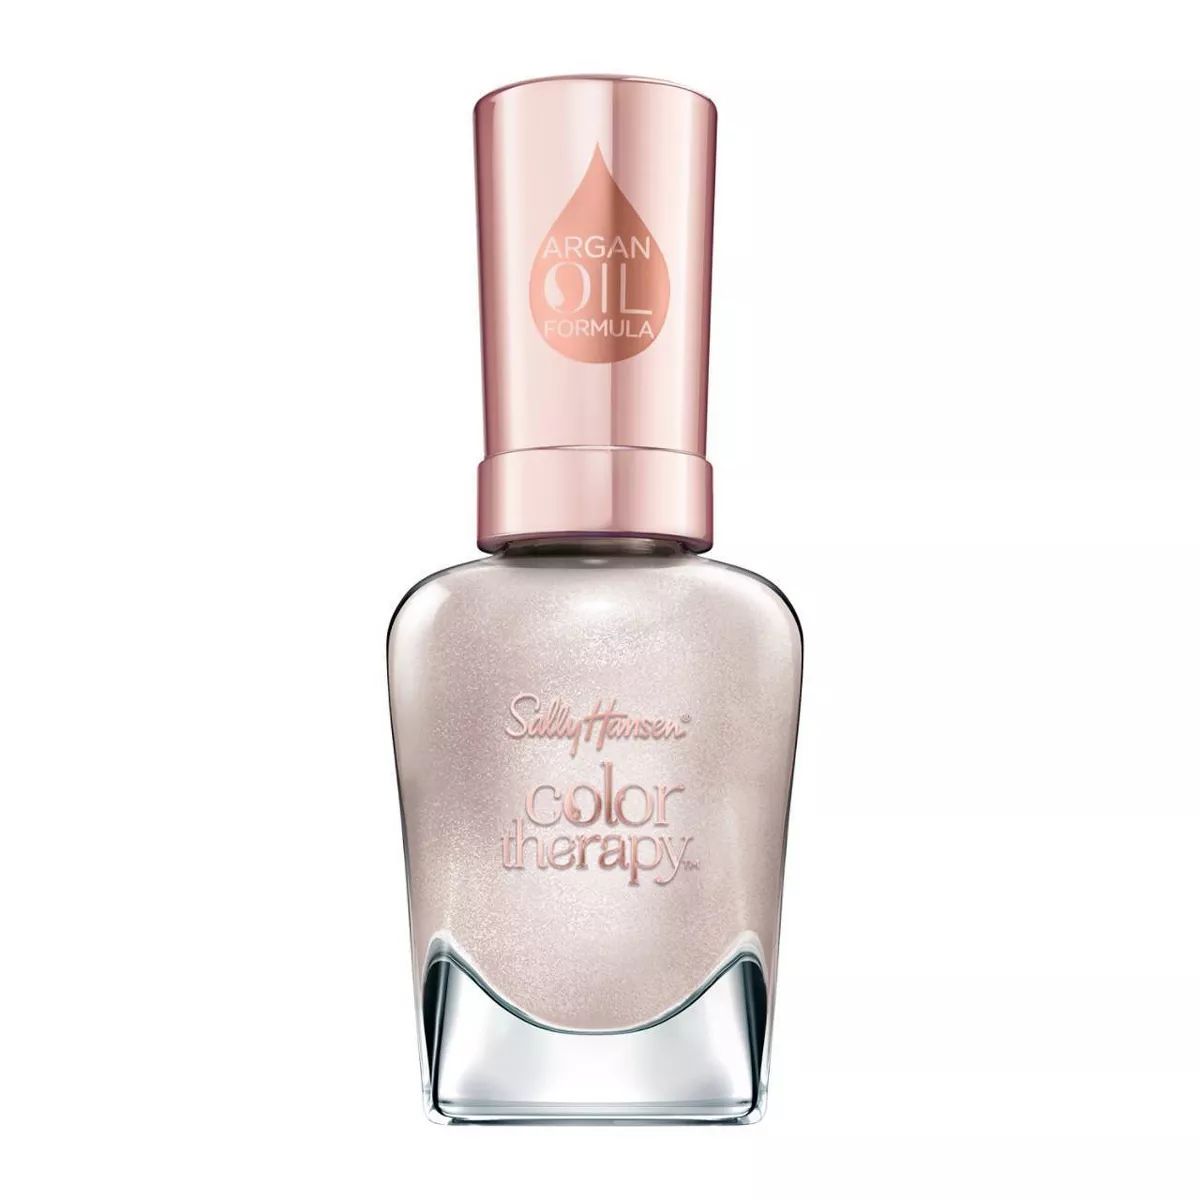 Sally Hansen Color Therapy Nail Polish - 130 One Day at a Time - 0.5 fl oz | Target